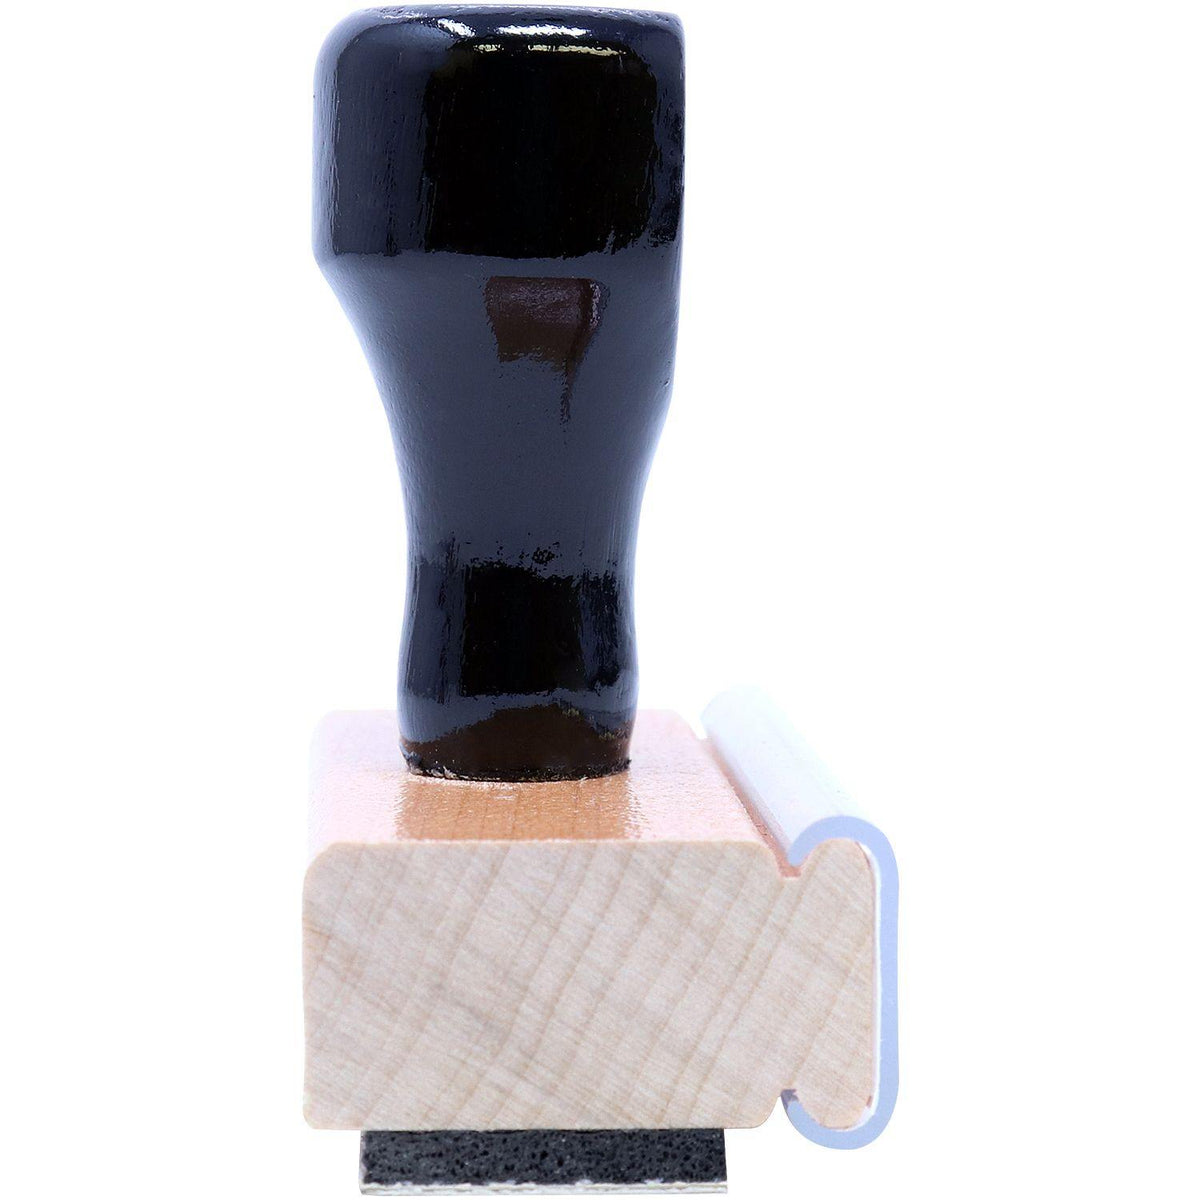 Side View of Large Received in Damaged Condition Rubber Stamp